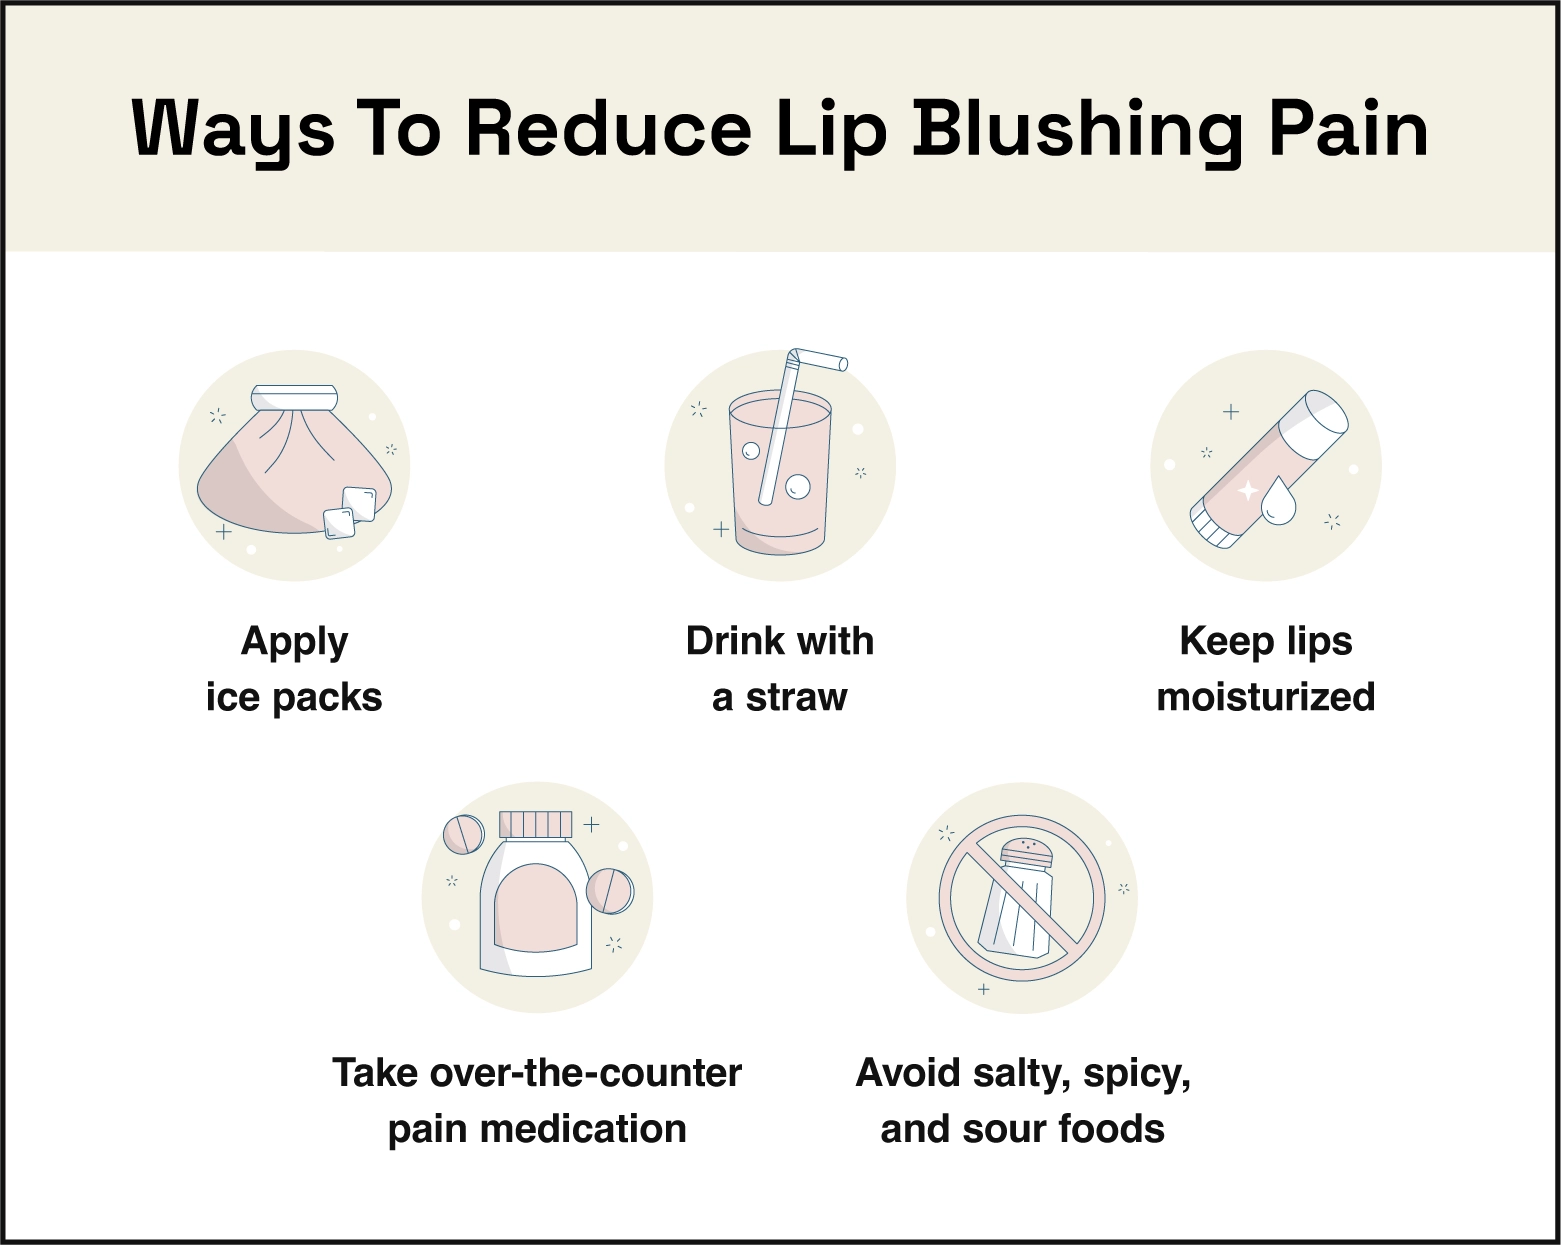 Ways to reduce lip blushing pain include drinking with a straw, applying ice packs, and keeping lips moisturized. 